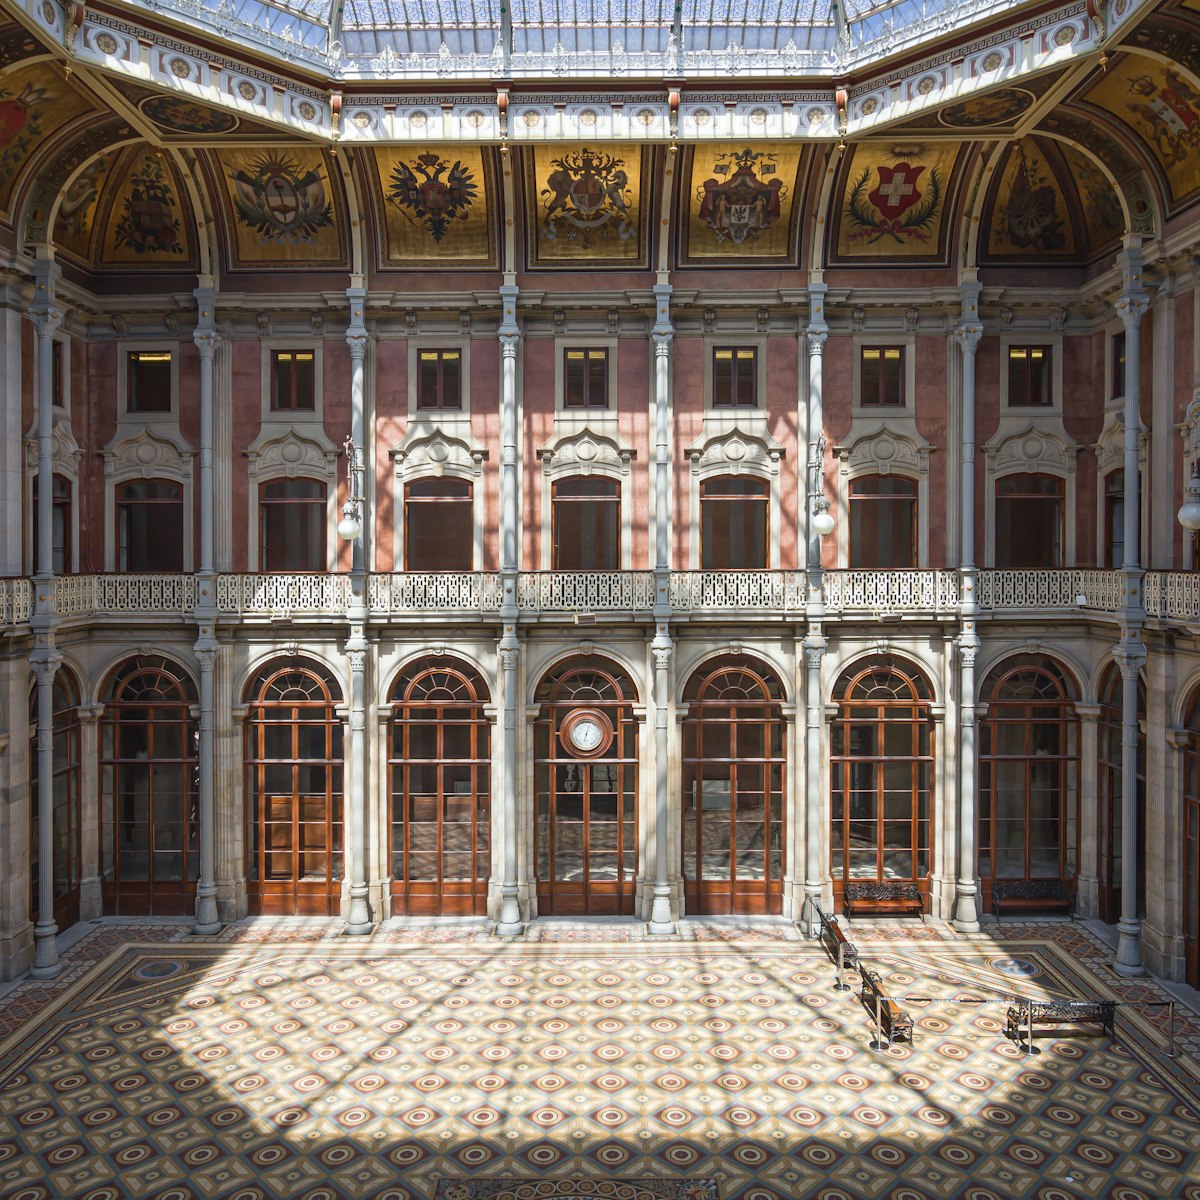 Porto, Portugal - August 25, 2020: Nations Courtyard at Stock Exchange Palace in Porto, Portugal.
1439431854
attraction, building, central, commercial, culture, dome, exchange, historic, historical, indoor, inner, interior, landmark, nations, octagonal, palacio da bolsa, patio das nacoes, porto, portuguese, stock, stock exchange